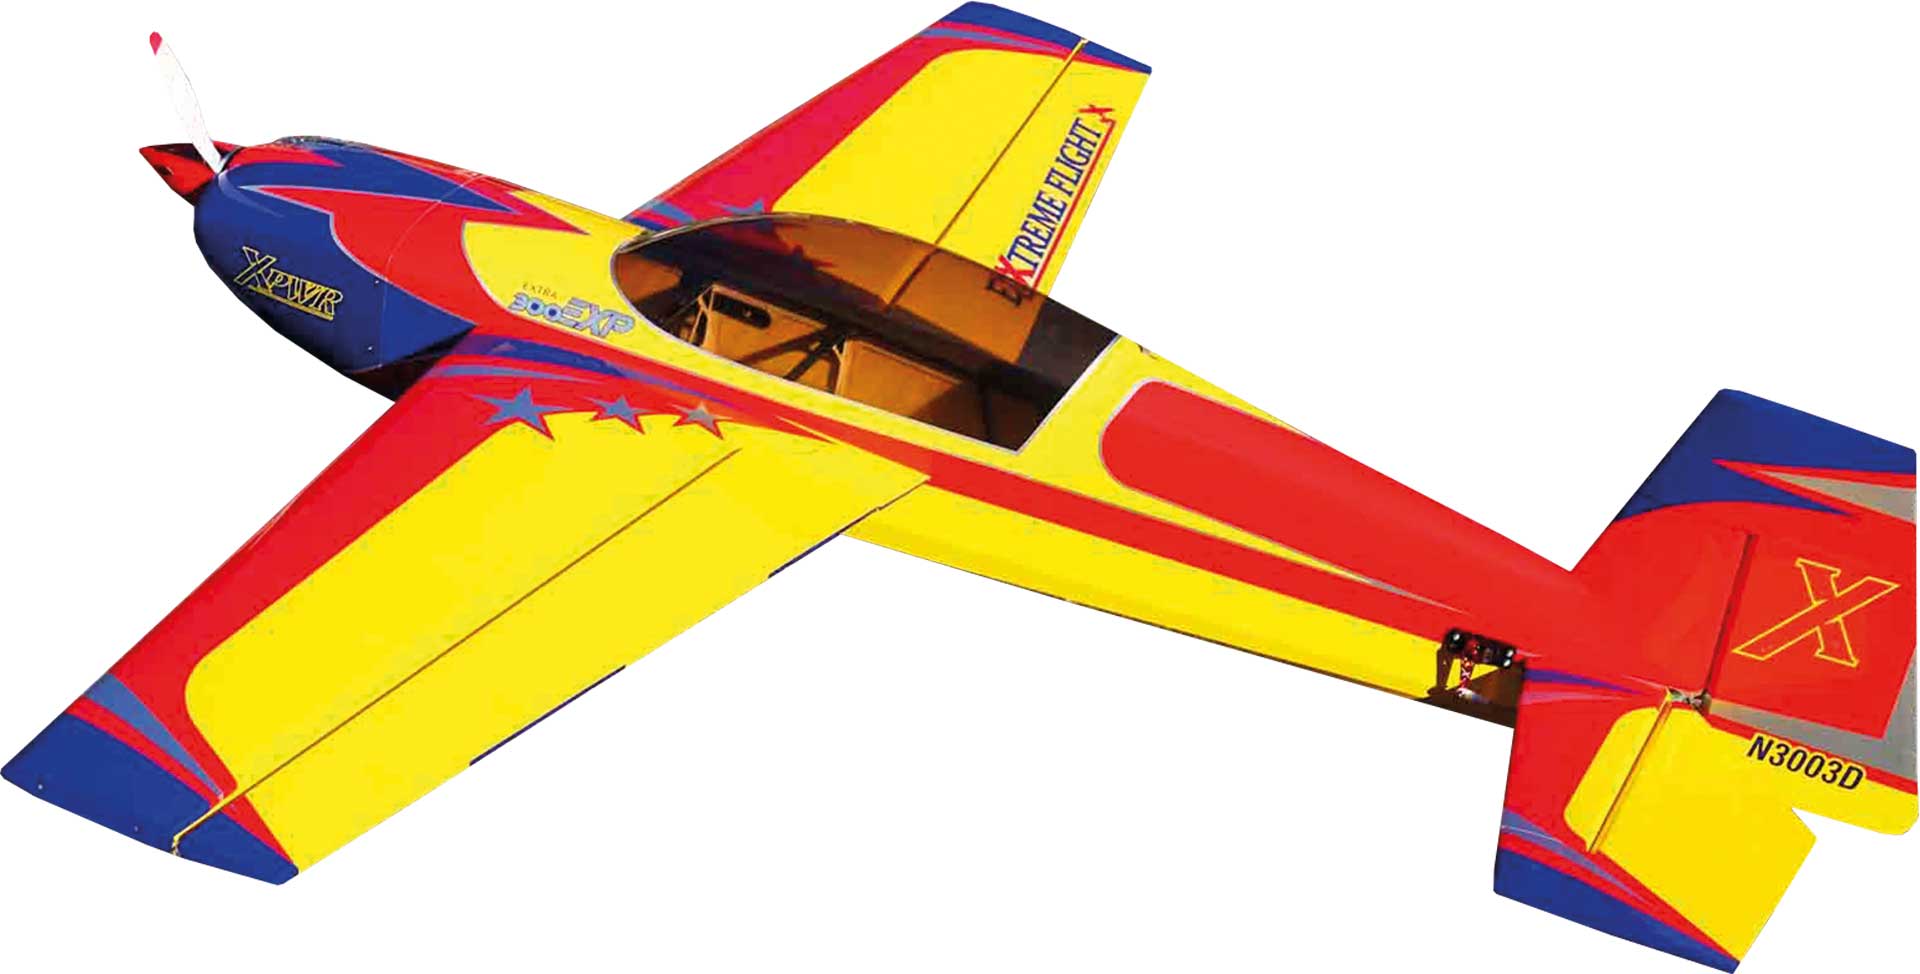 EXTREMEFLIGHT-RC EXTRA 300 60" EXP V2 Plus red/yellow/white ARF with quick release wing latching mechanism